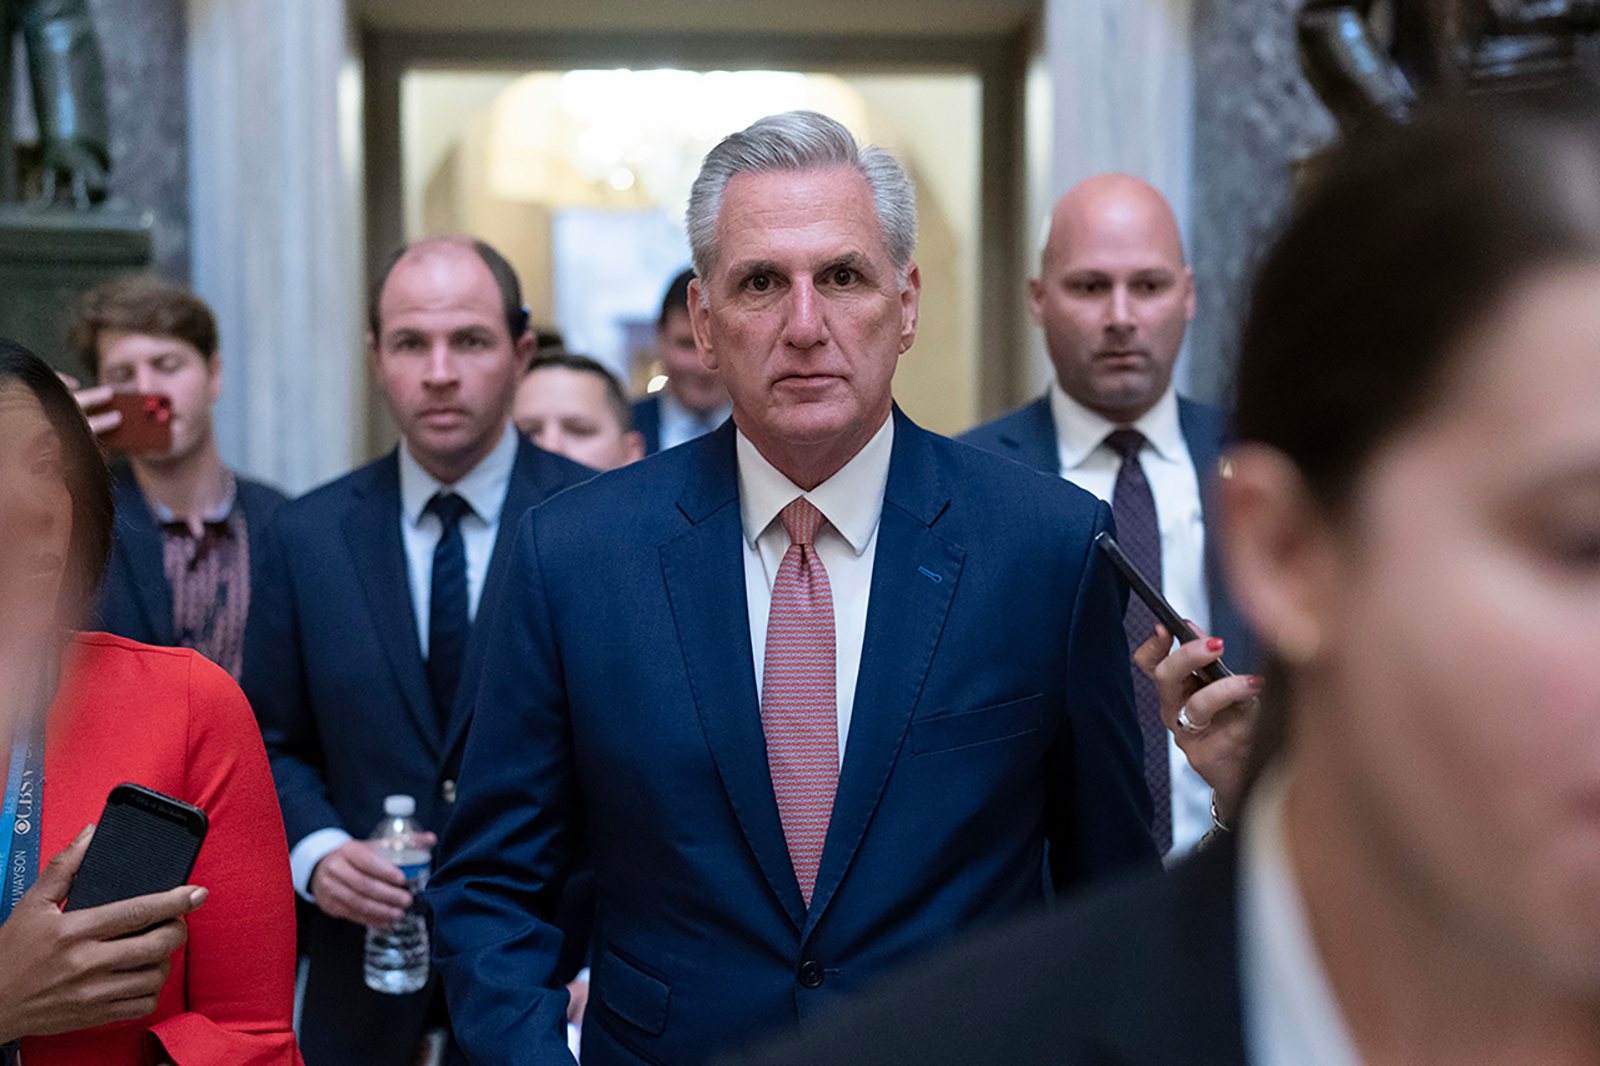 Kevin McCarthy, R-Calif., walks to the House chamber at Capitol Hill, in Washington on Tuesday, May 30.